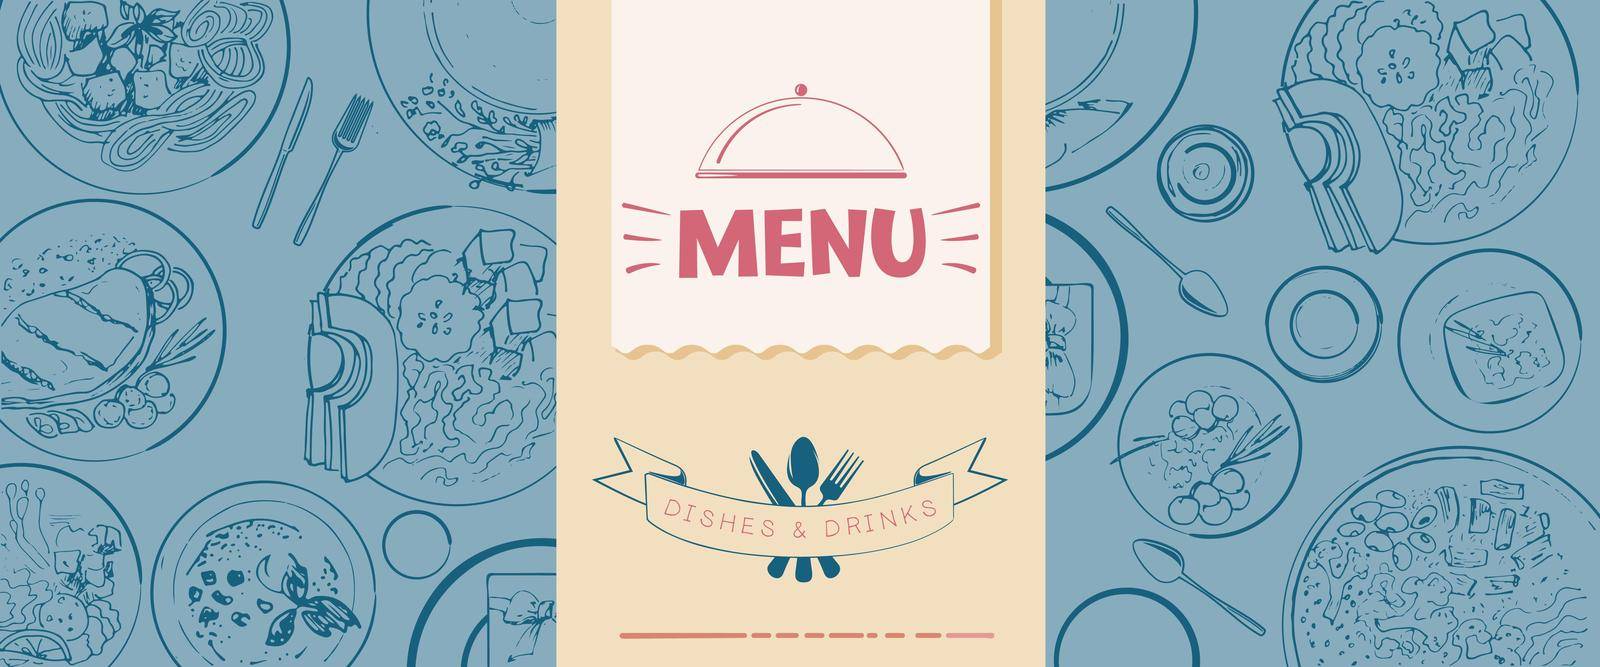 Menu template for a restaurant. Cover of a brochure with dishes drawn in the style of a sketch.